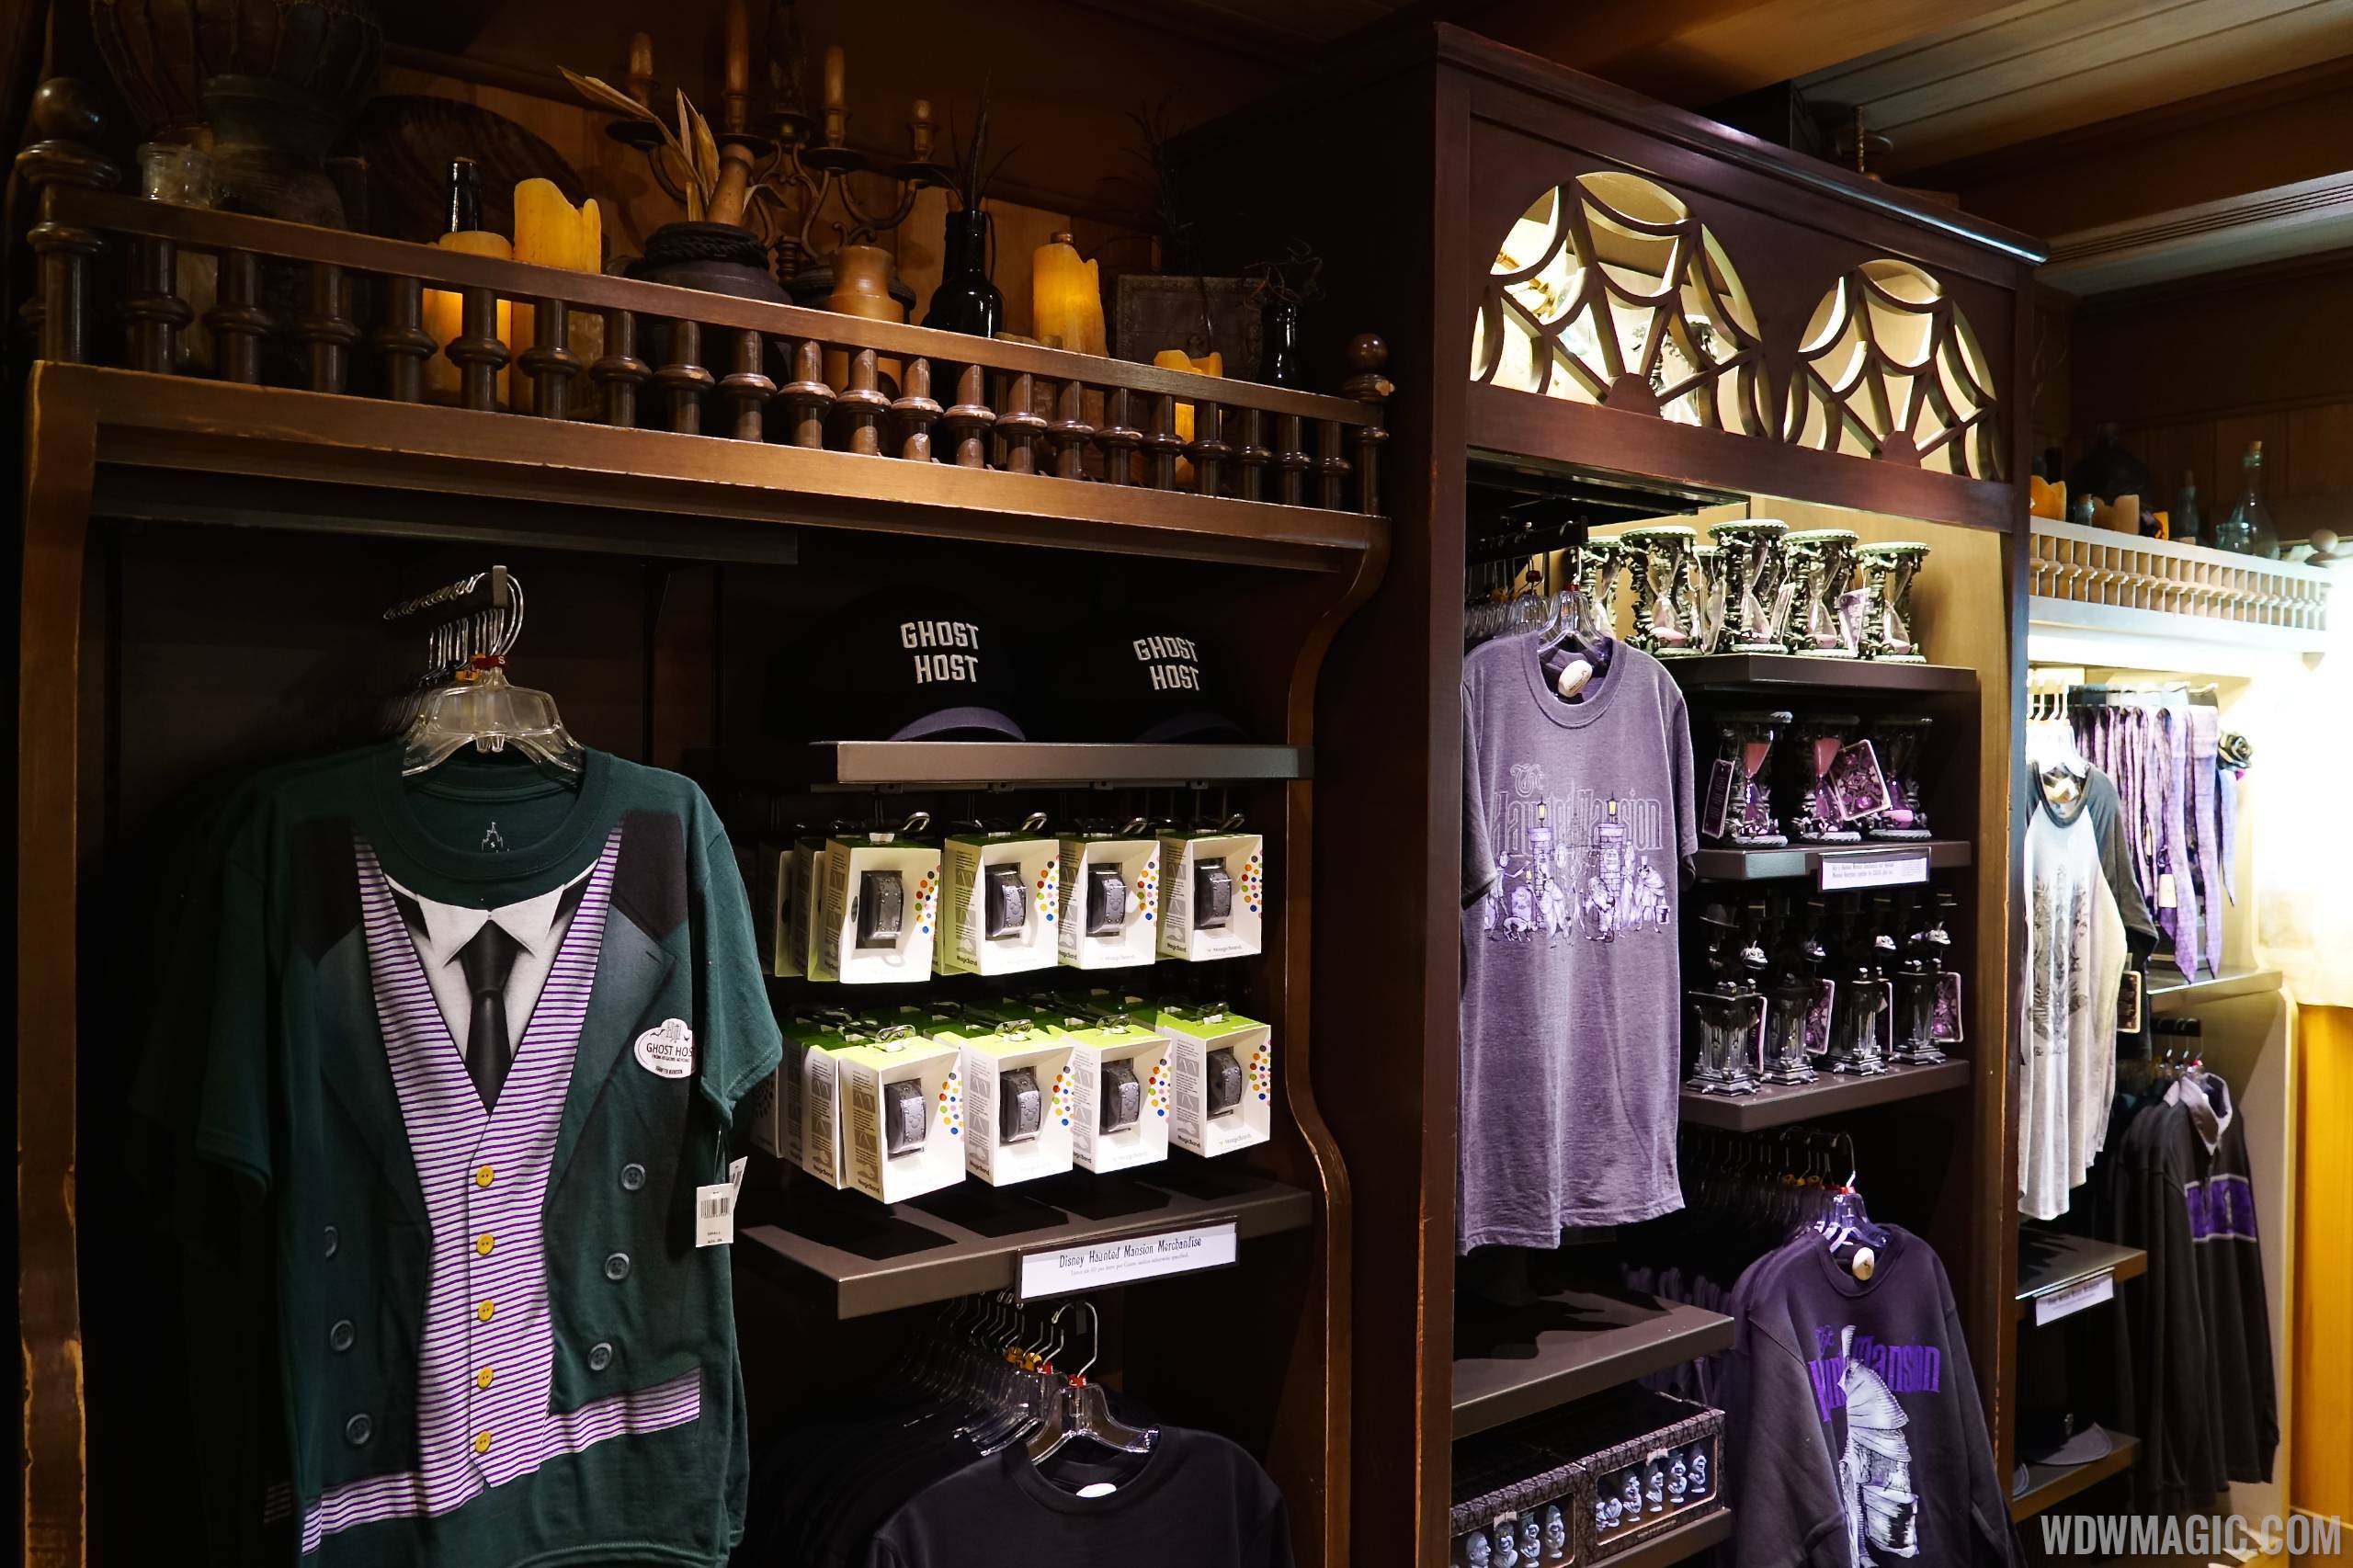 PHOTOS - First look inside the new Haunted Mansion gift shop - Memento Mori